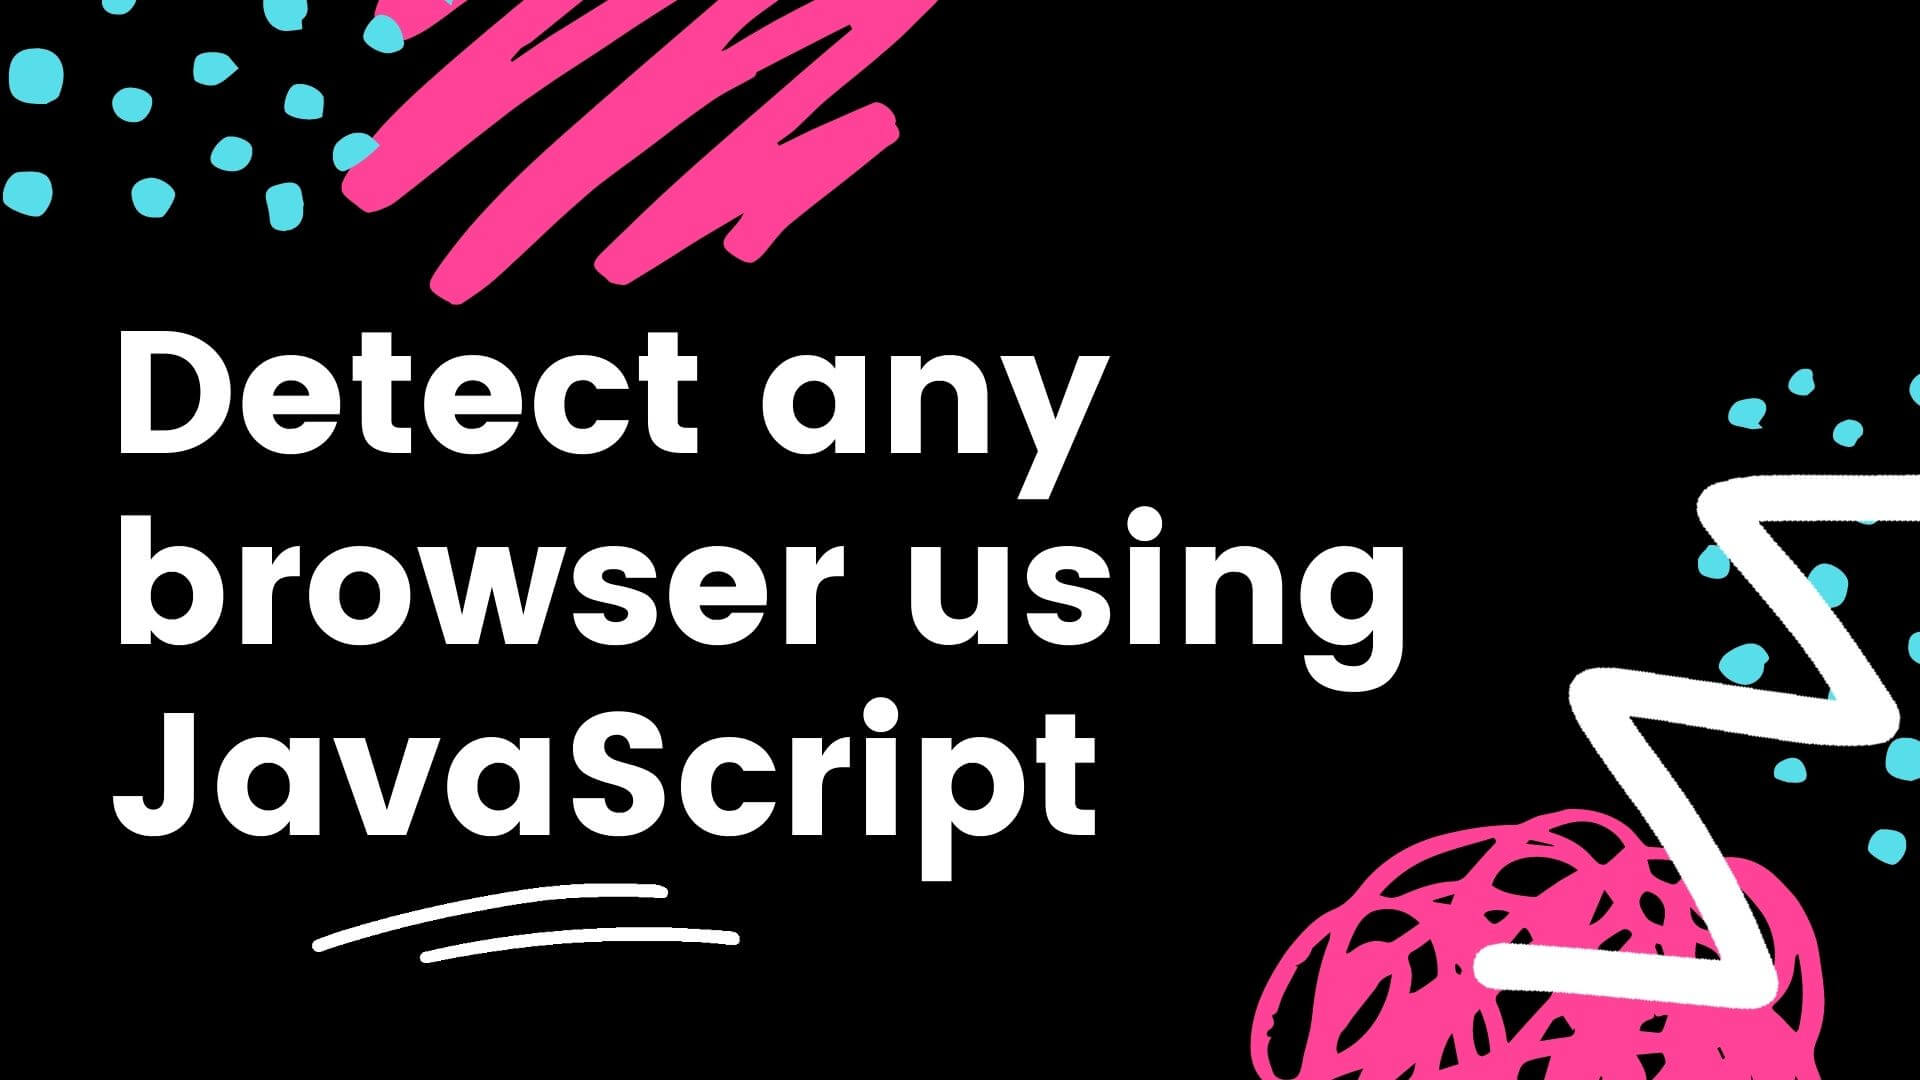 Detect any browser using JavaScript